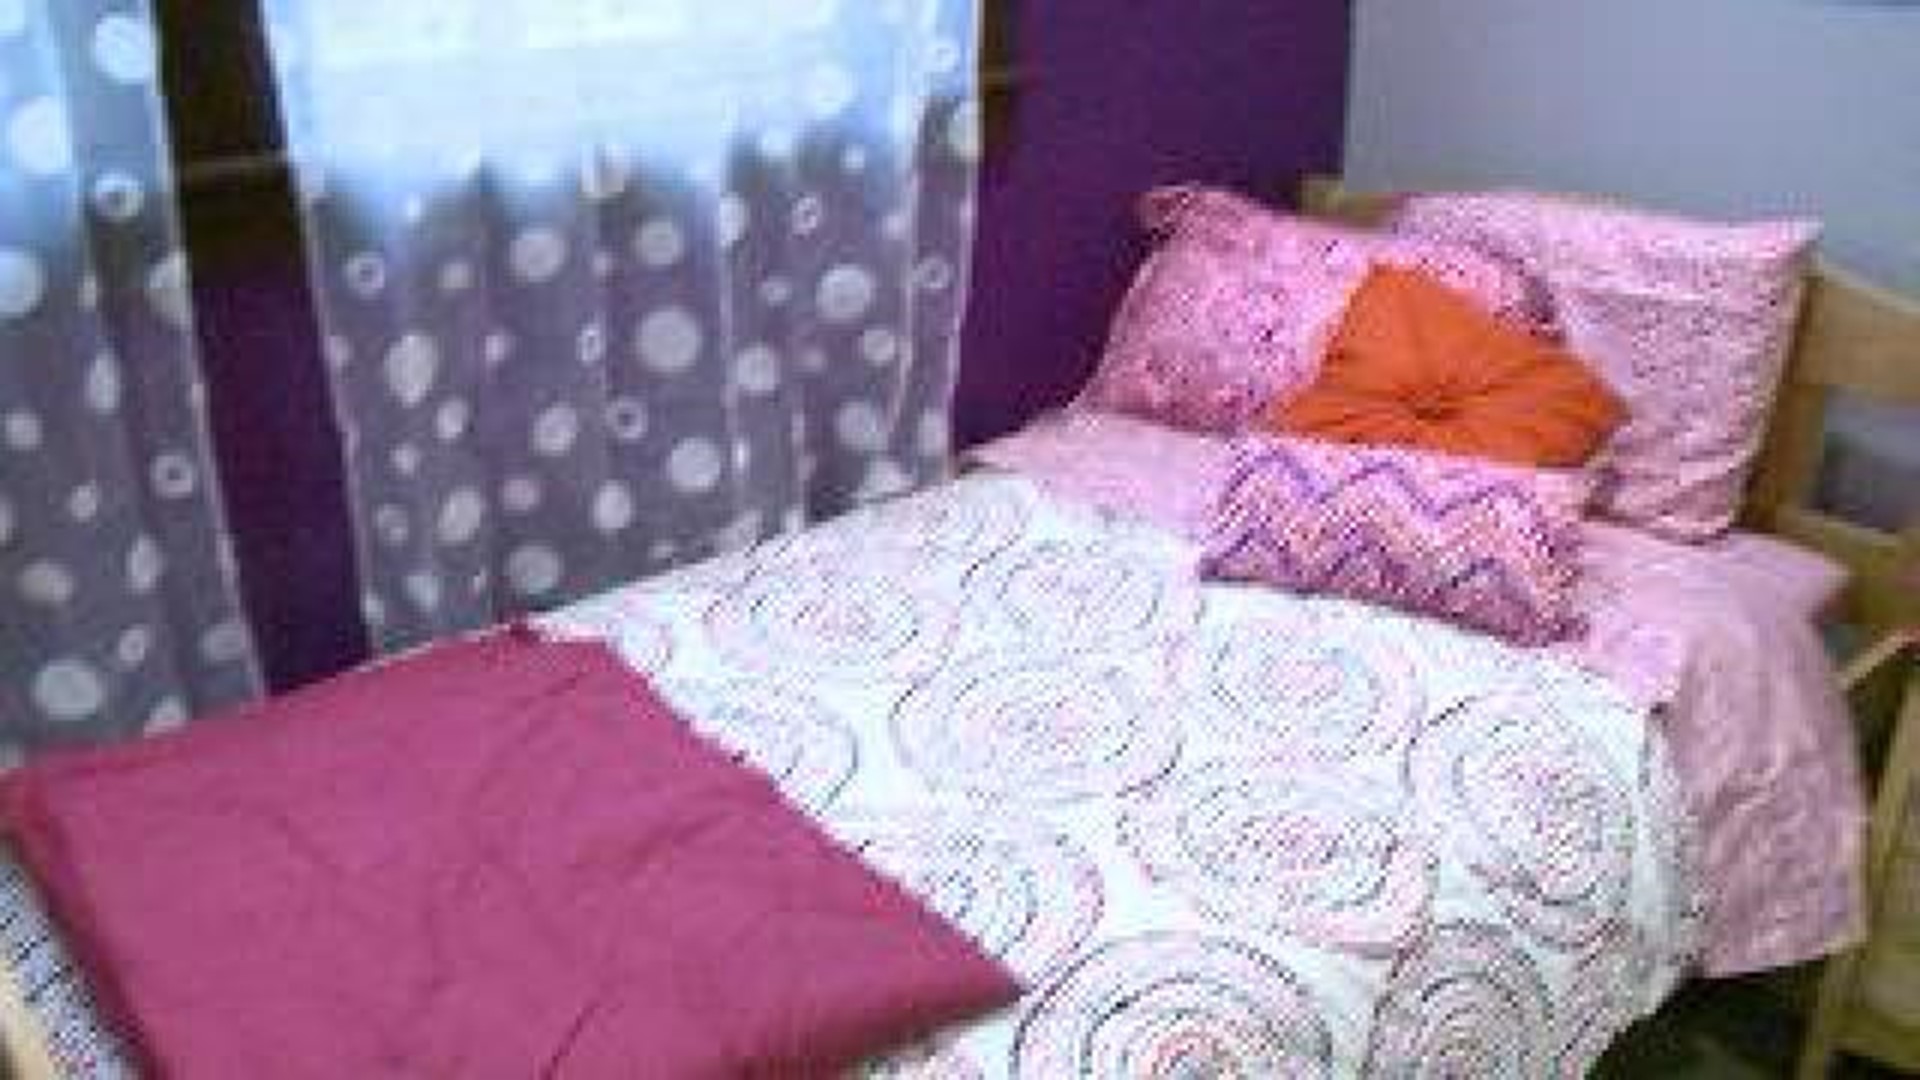 Adopt-A-Room Program Helps Abused and Neglected Kids